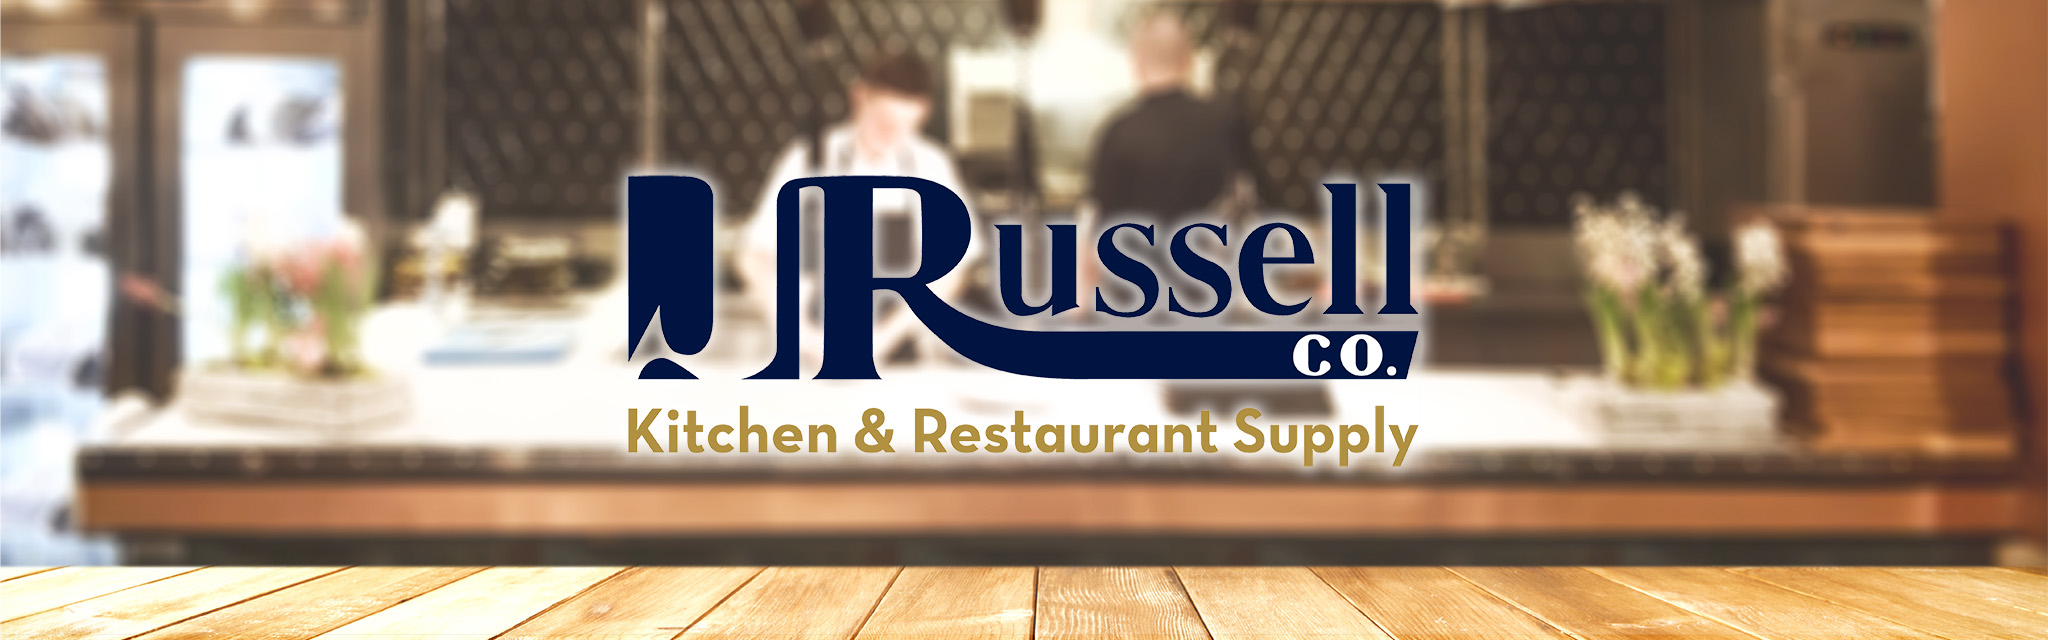 Welcome to J. Russell Kitchen & Restaurant Supply Co.